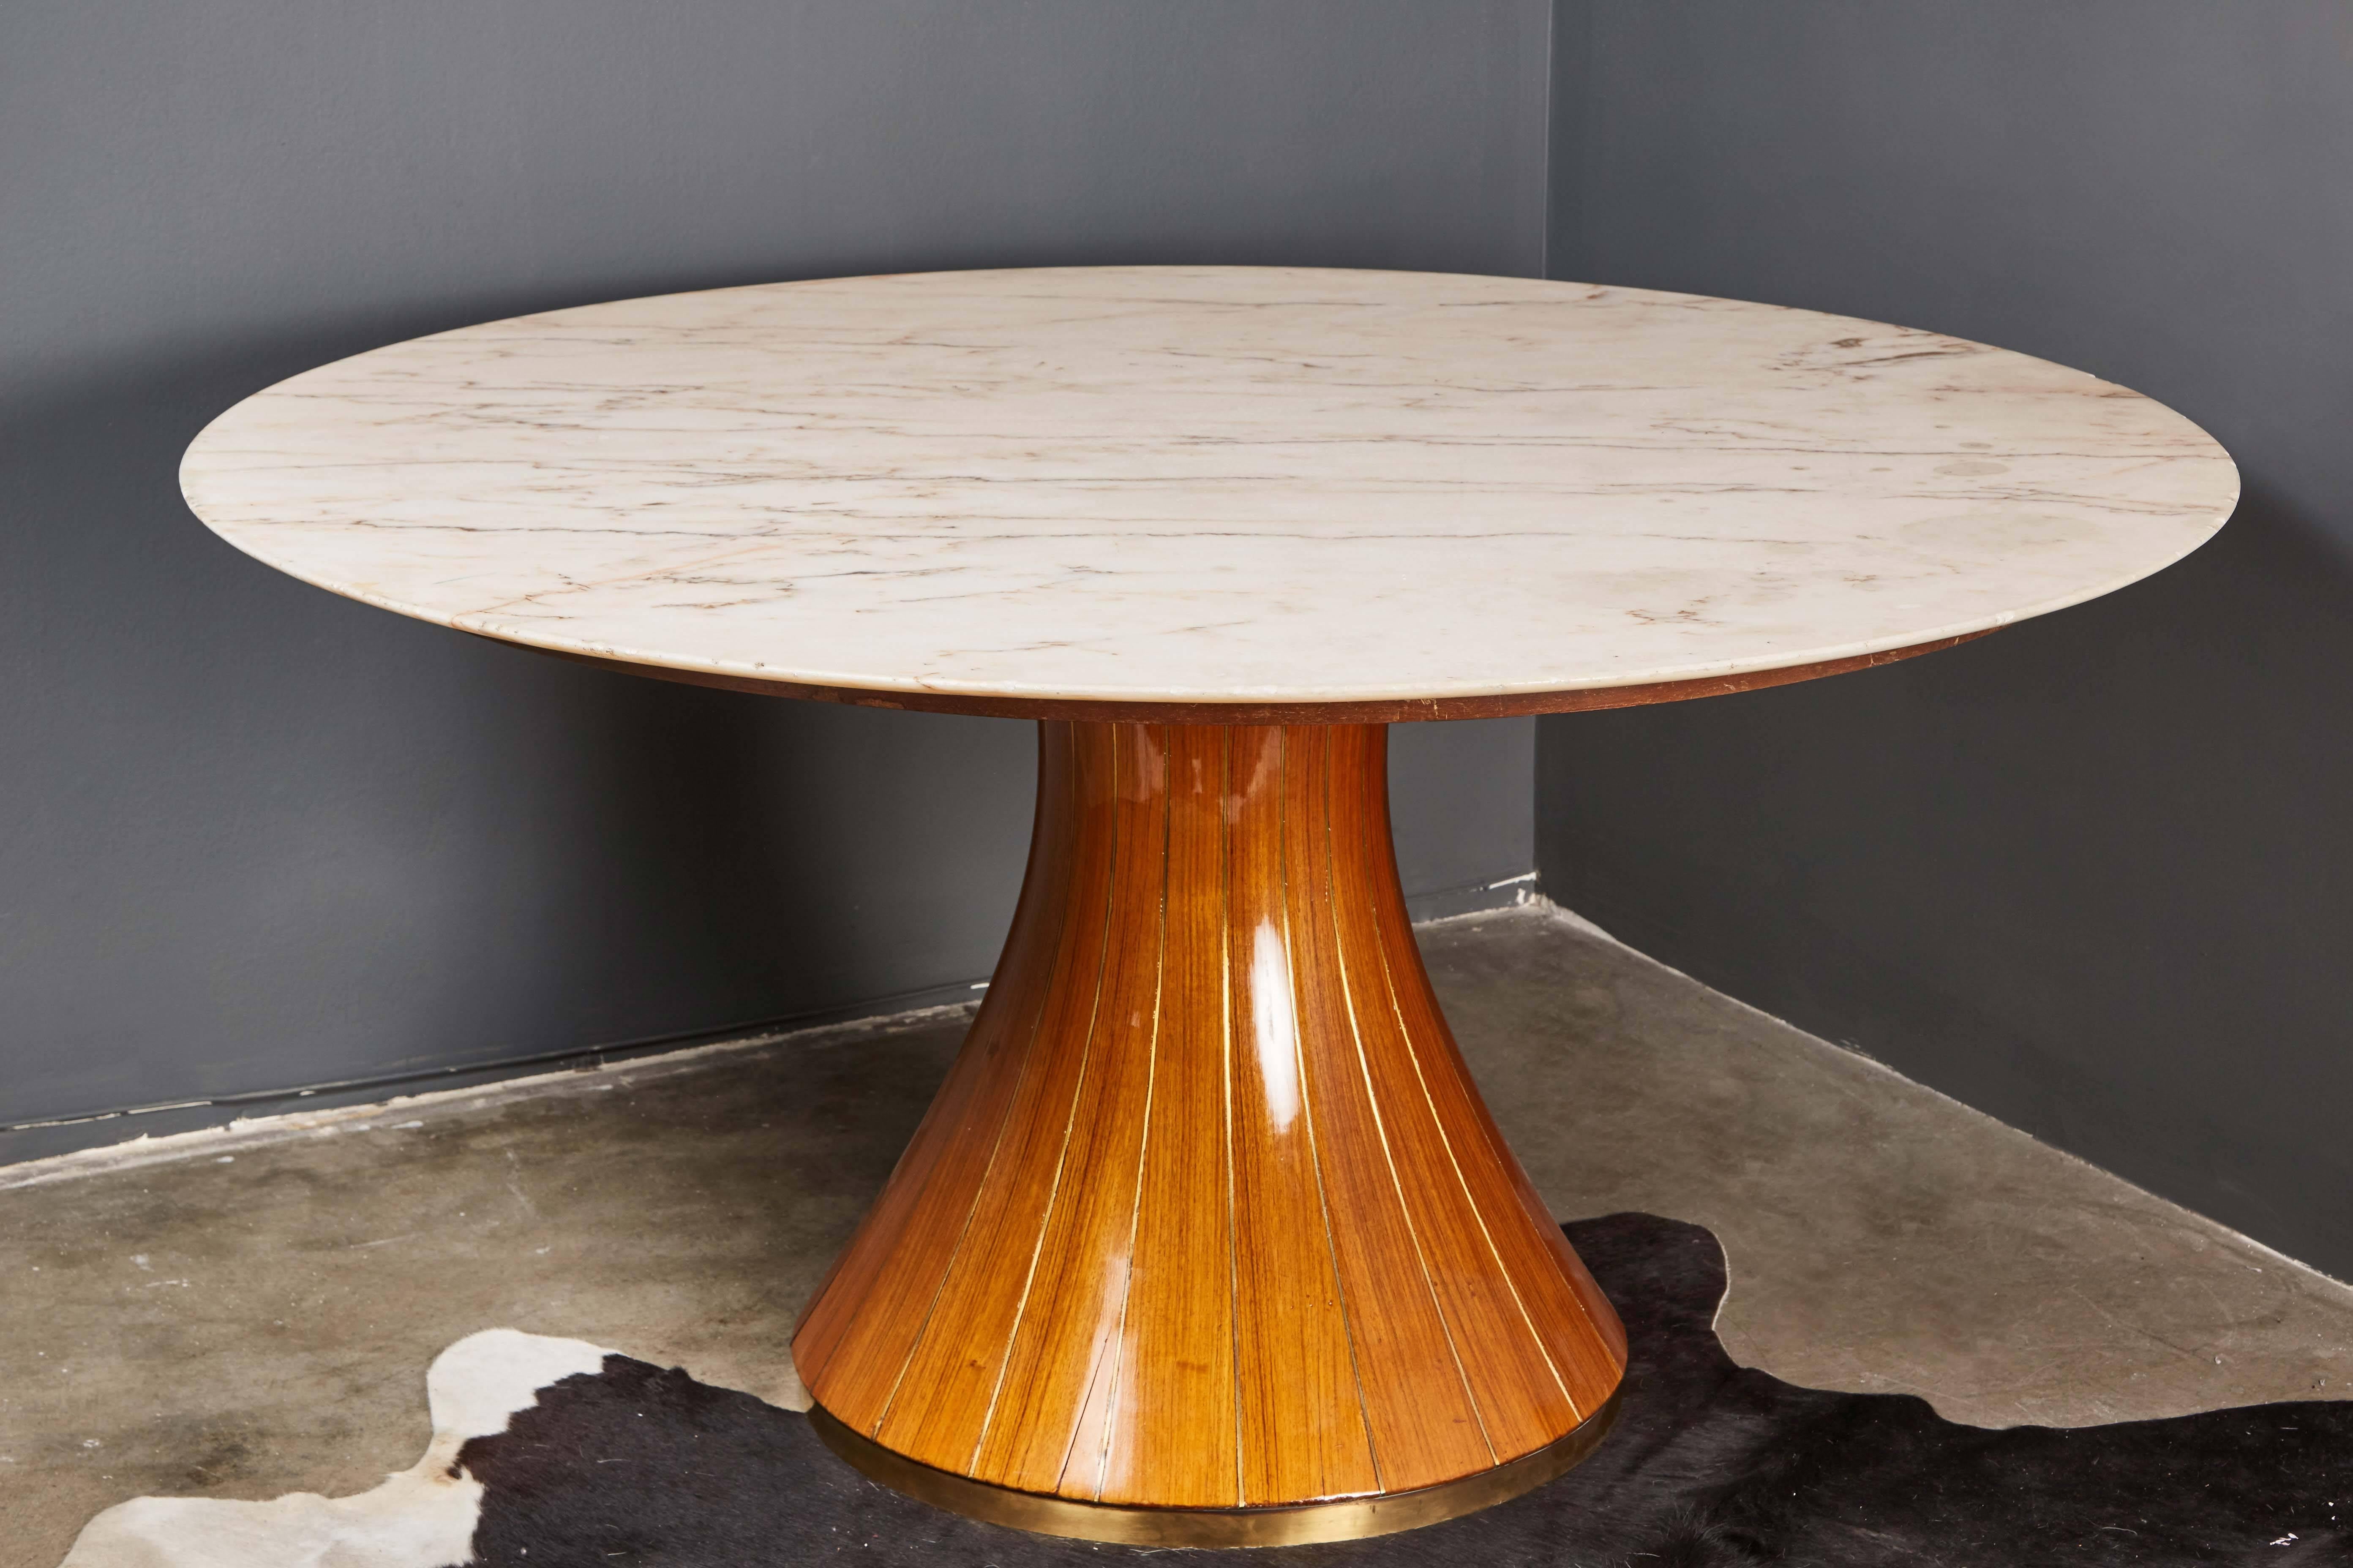 A stunning round centre table attributed to Paolo Buffa, with an onyx top over a walnut base with brass inlay.